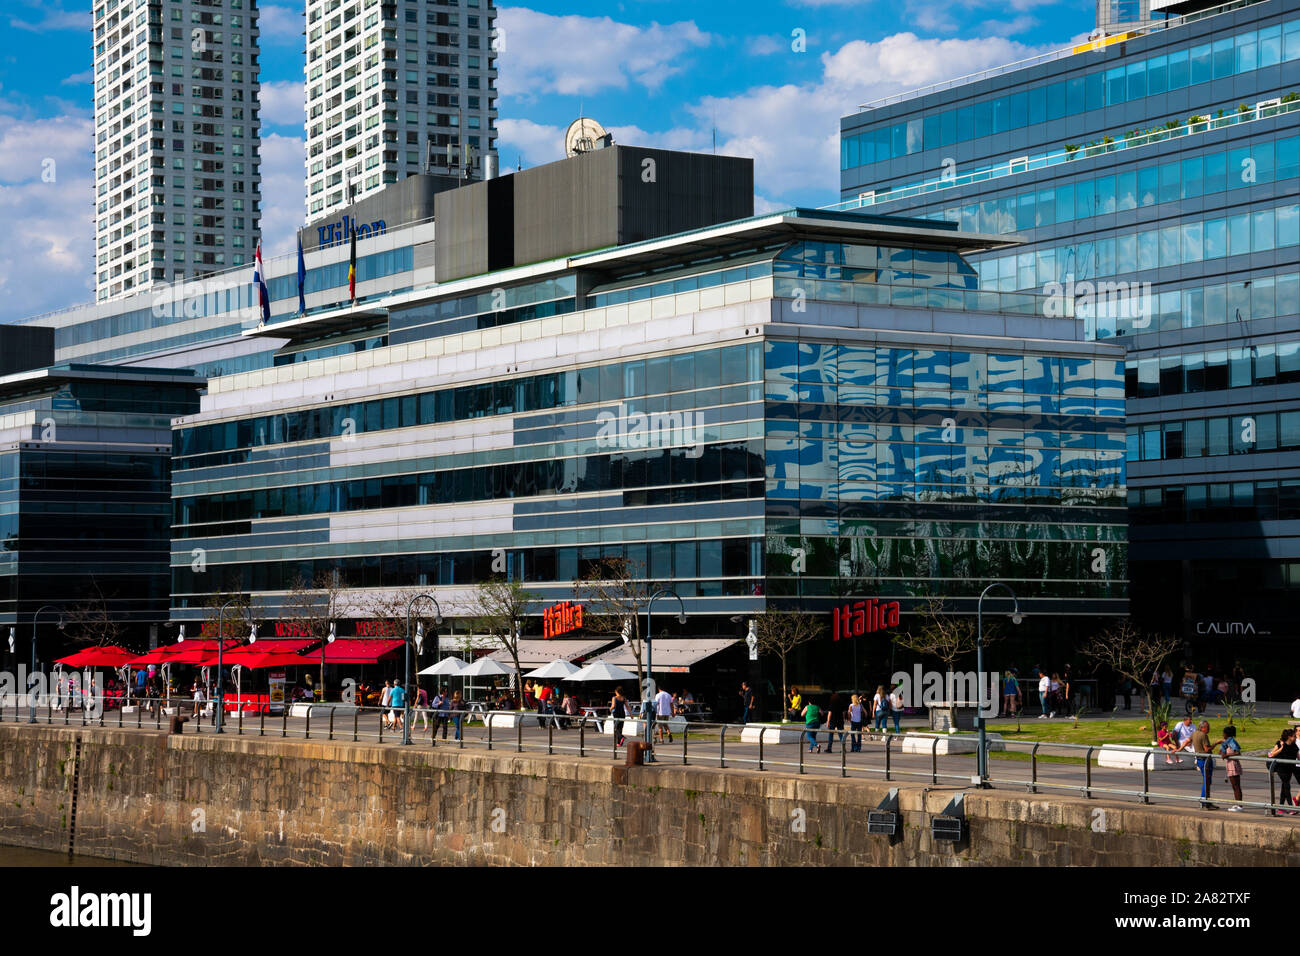 Buenos Aires, Argentina. October 26, 2019. View of Puerto Madero neighborhood waterfront, the newest barrio (district) of Buenos Aires Stock Photo